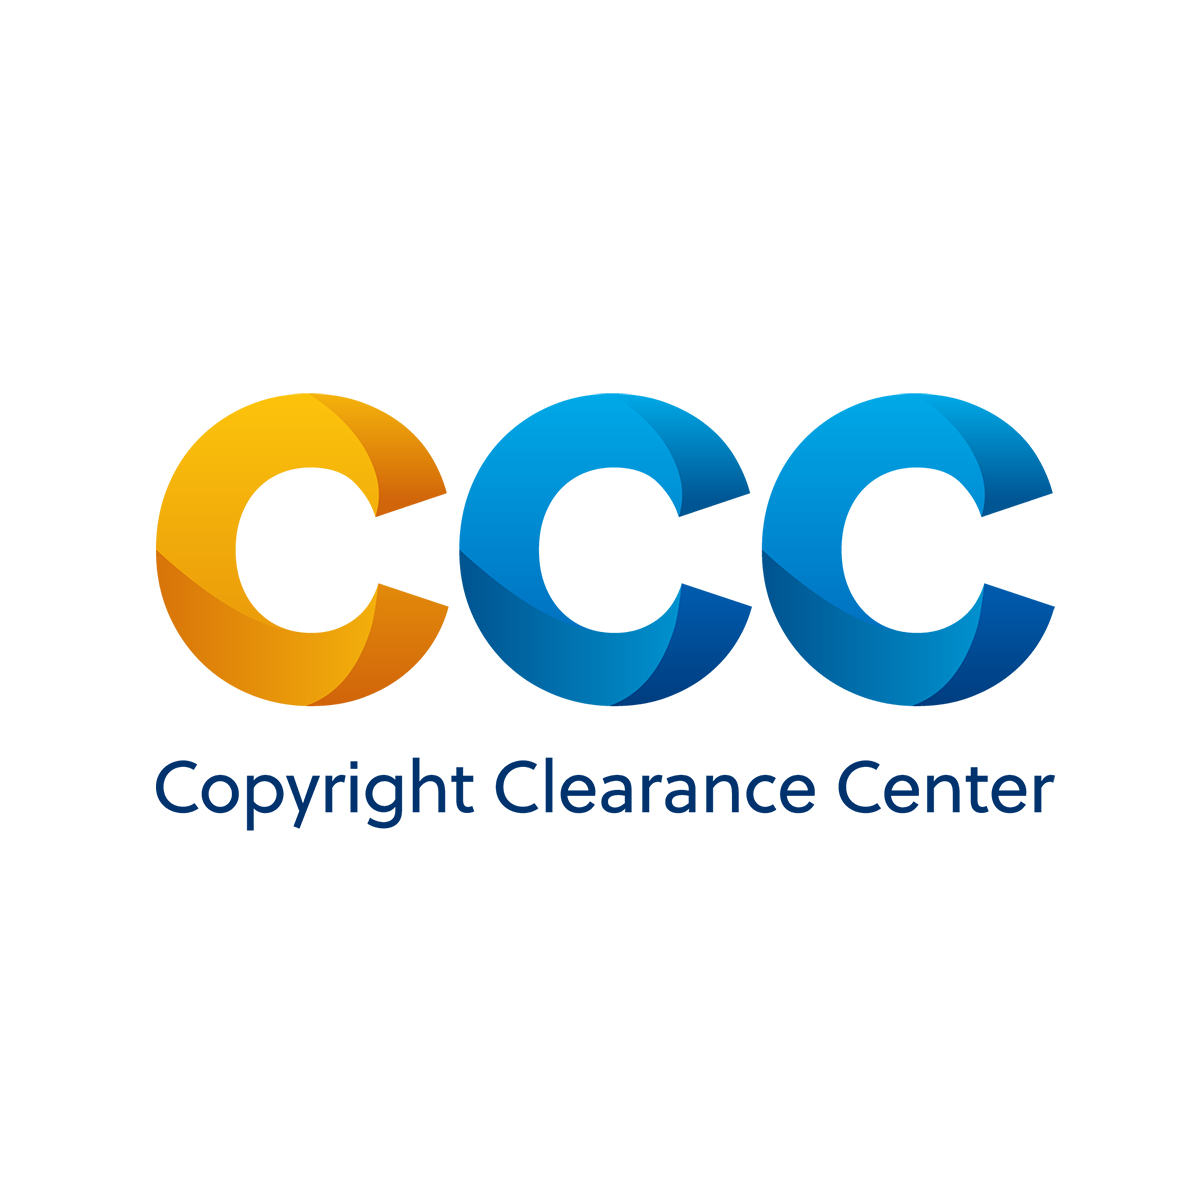 Copyright Clearence Center